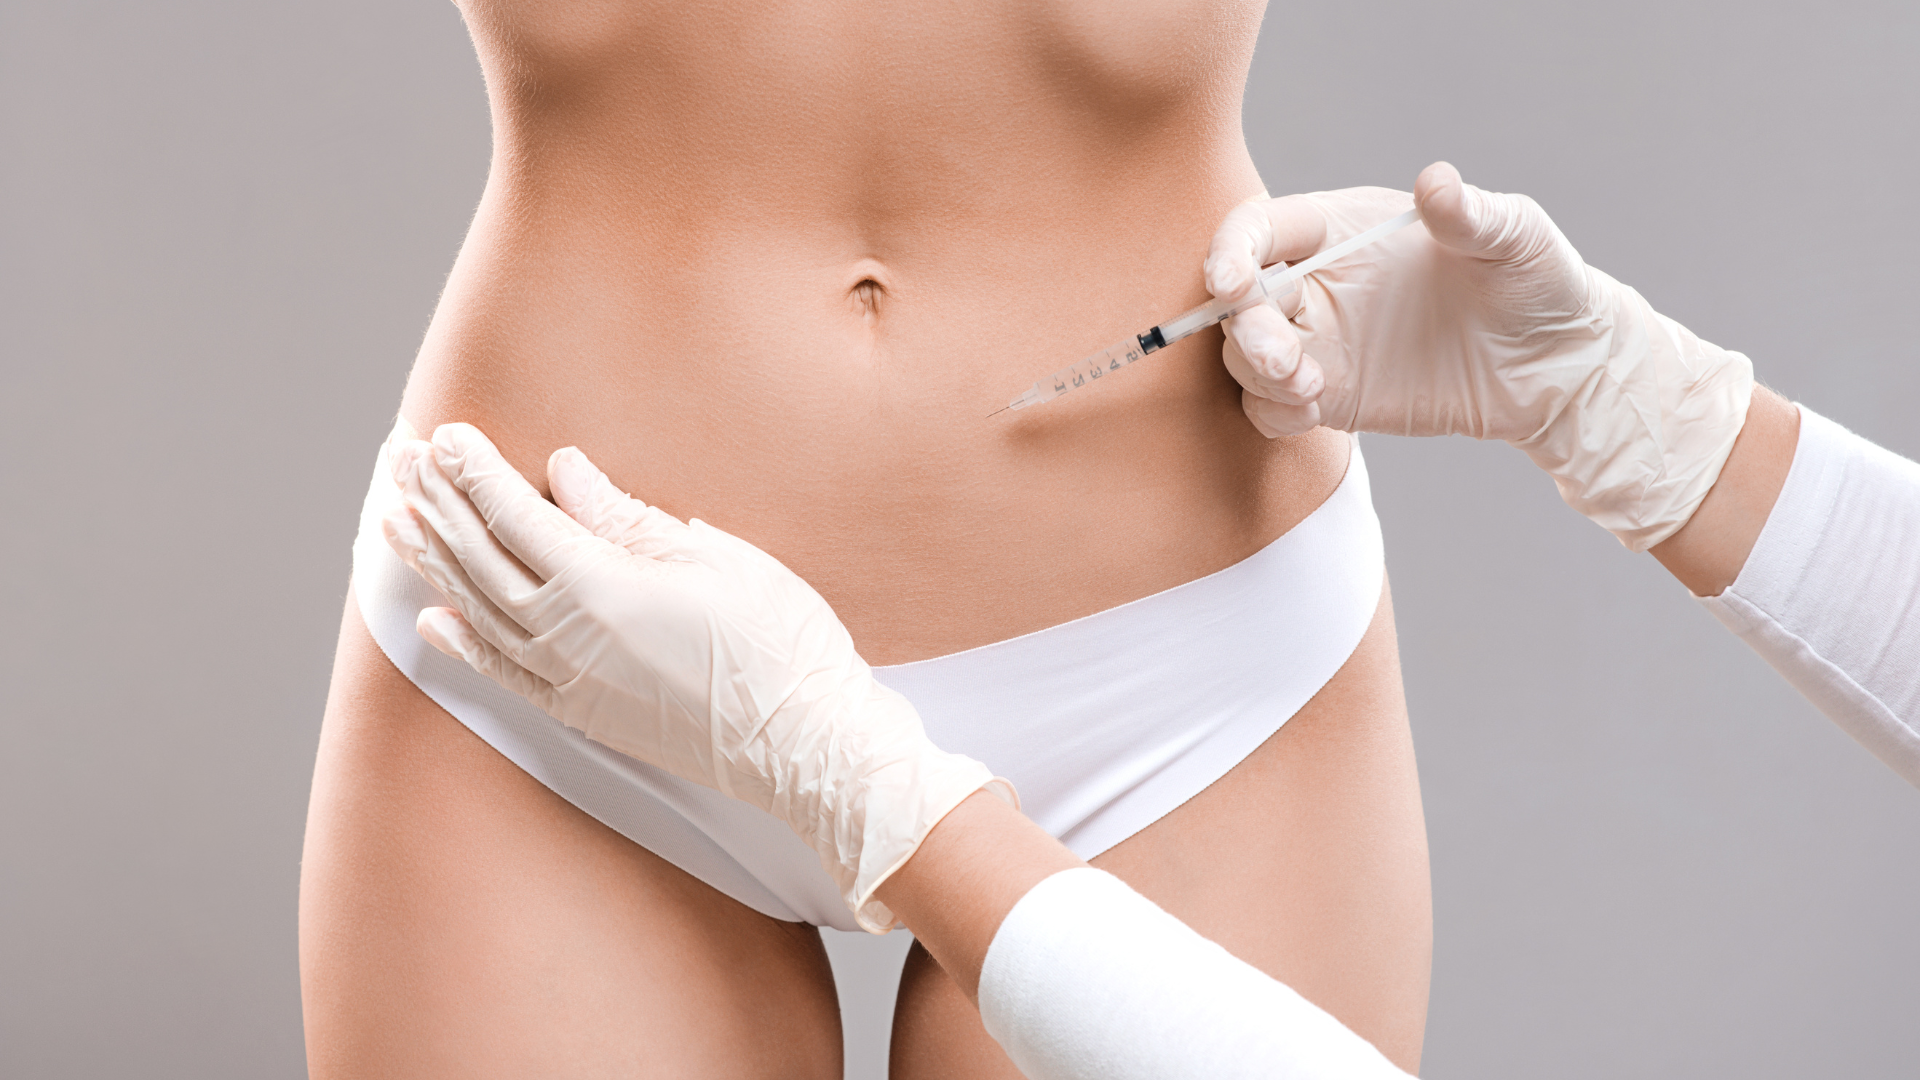 Woman getting injections on stomach